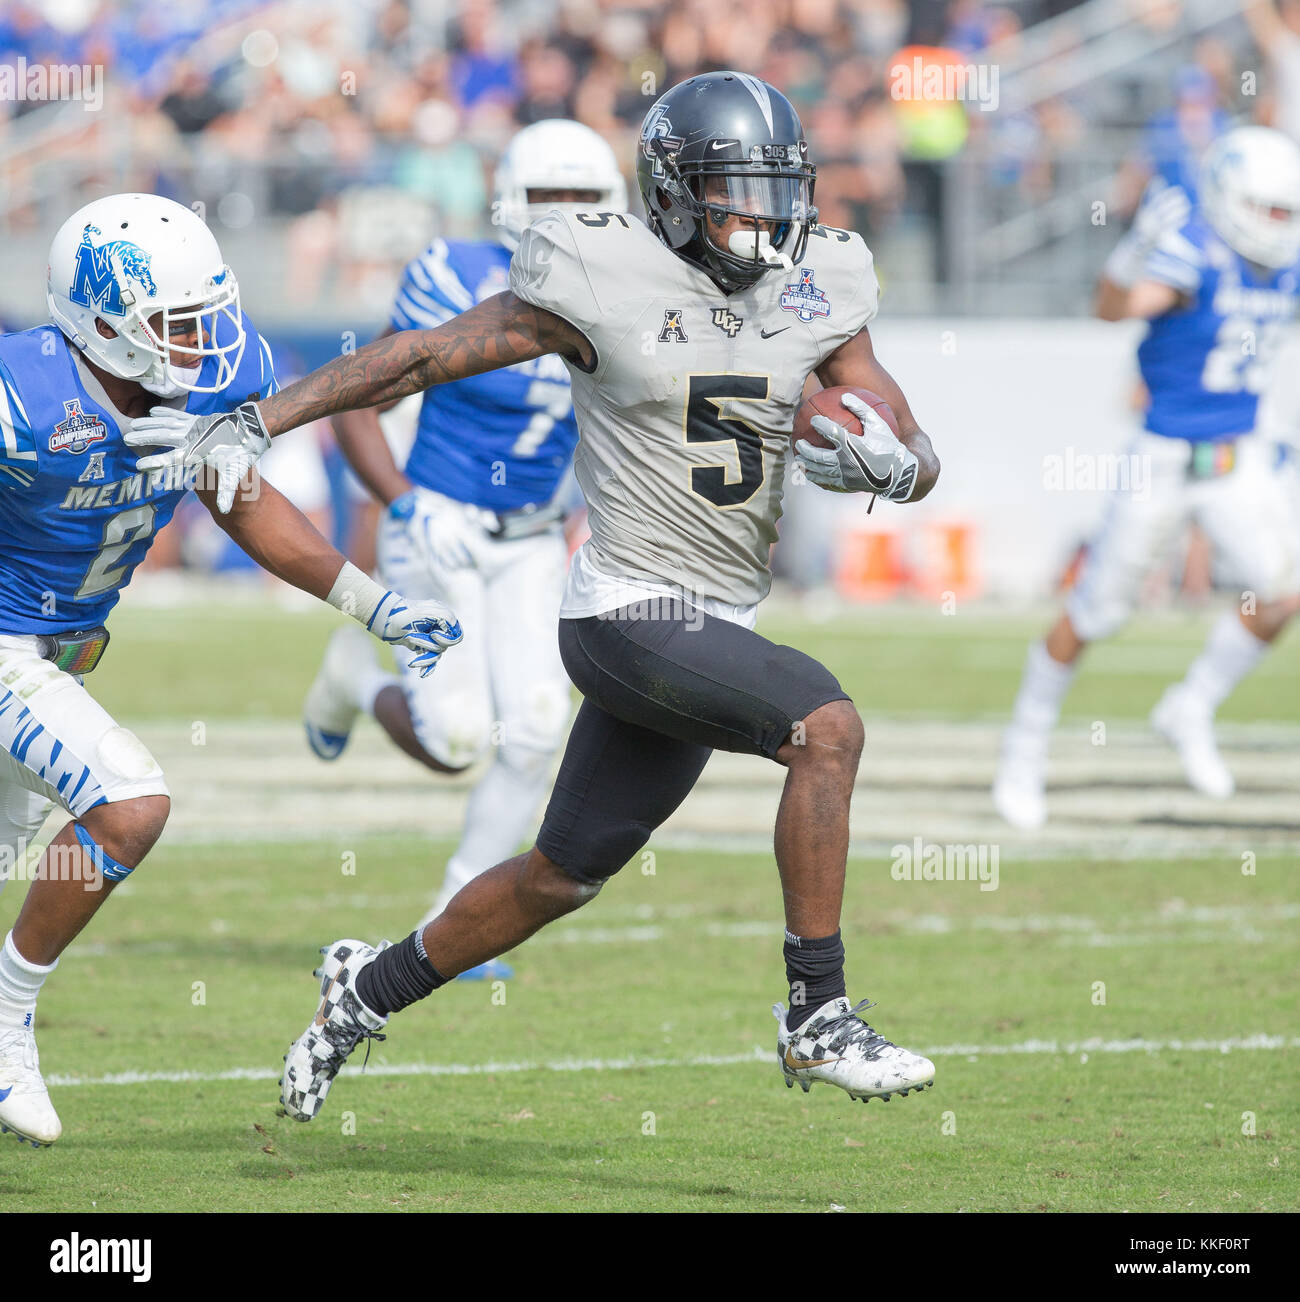 Orlando, FL, USA. 2nd Dec, 2017. UCF's Dedrick Snelson #5 streaks down the sideline after a catch during the AAC Football Championship game between the UCF Knights and the Memphis Tigers at the Spectrum Stadium in Orlando, FL. Kyle Okita/CSM/Alamy Live News Stock Photo